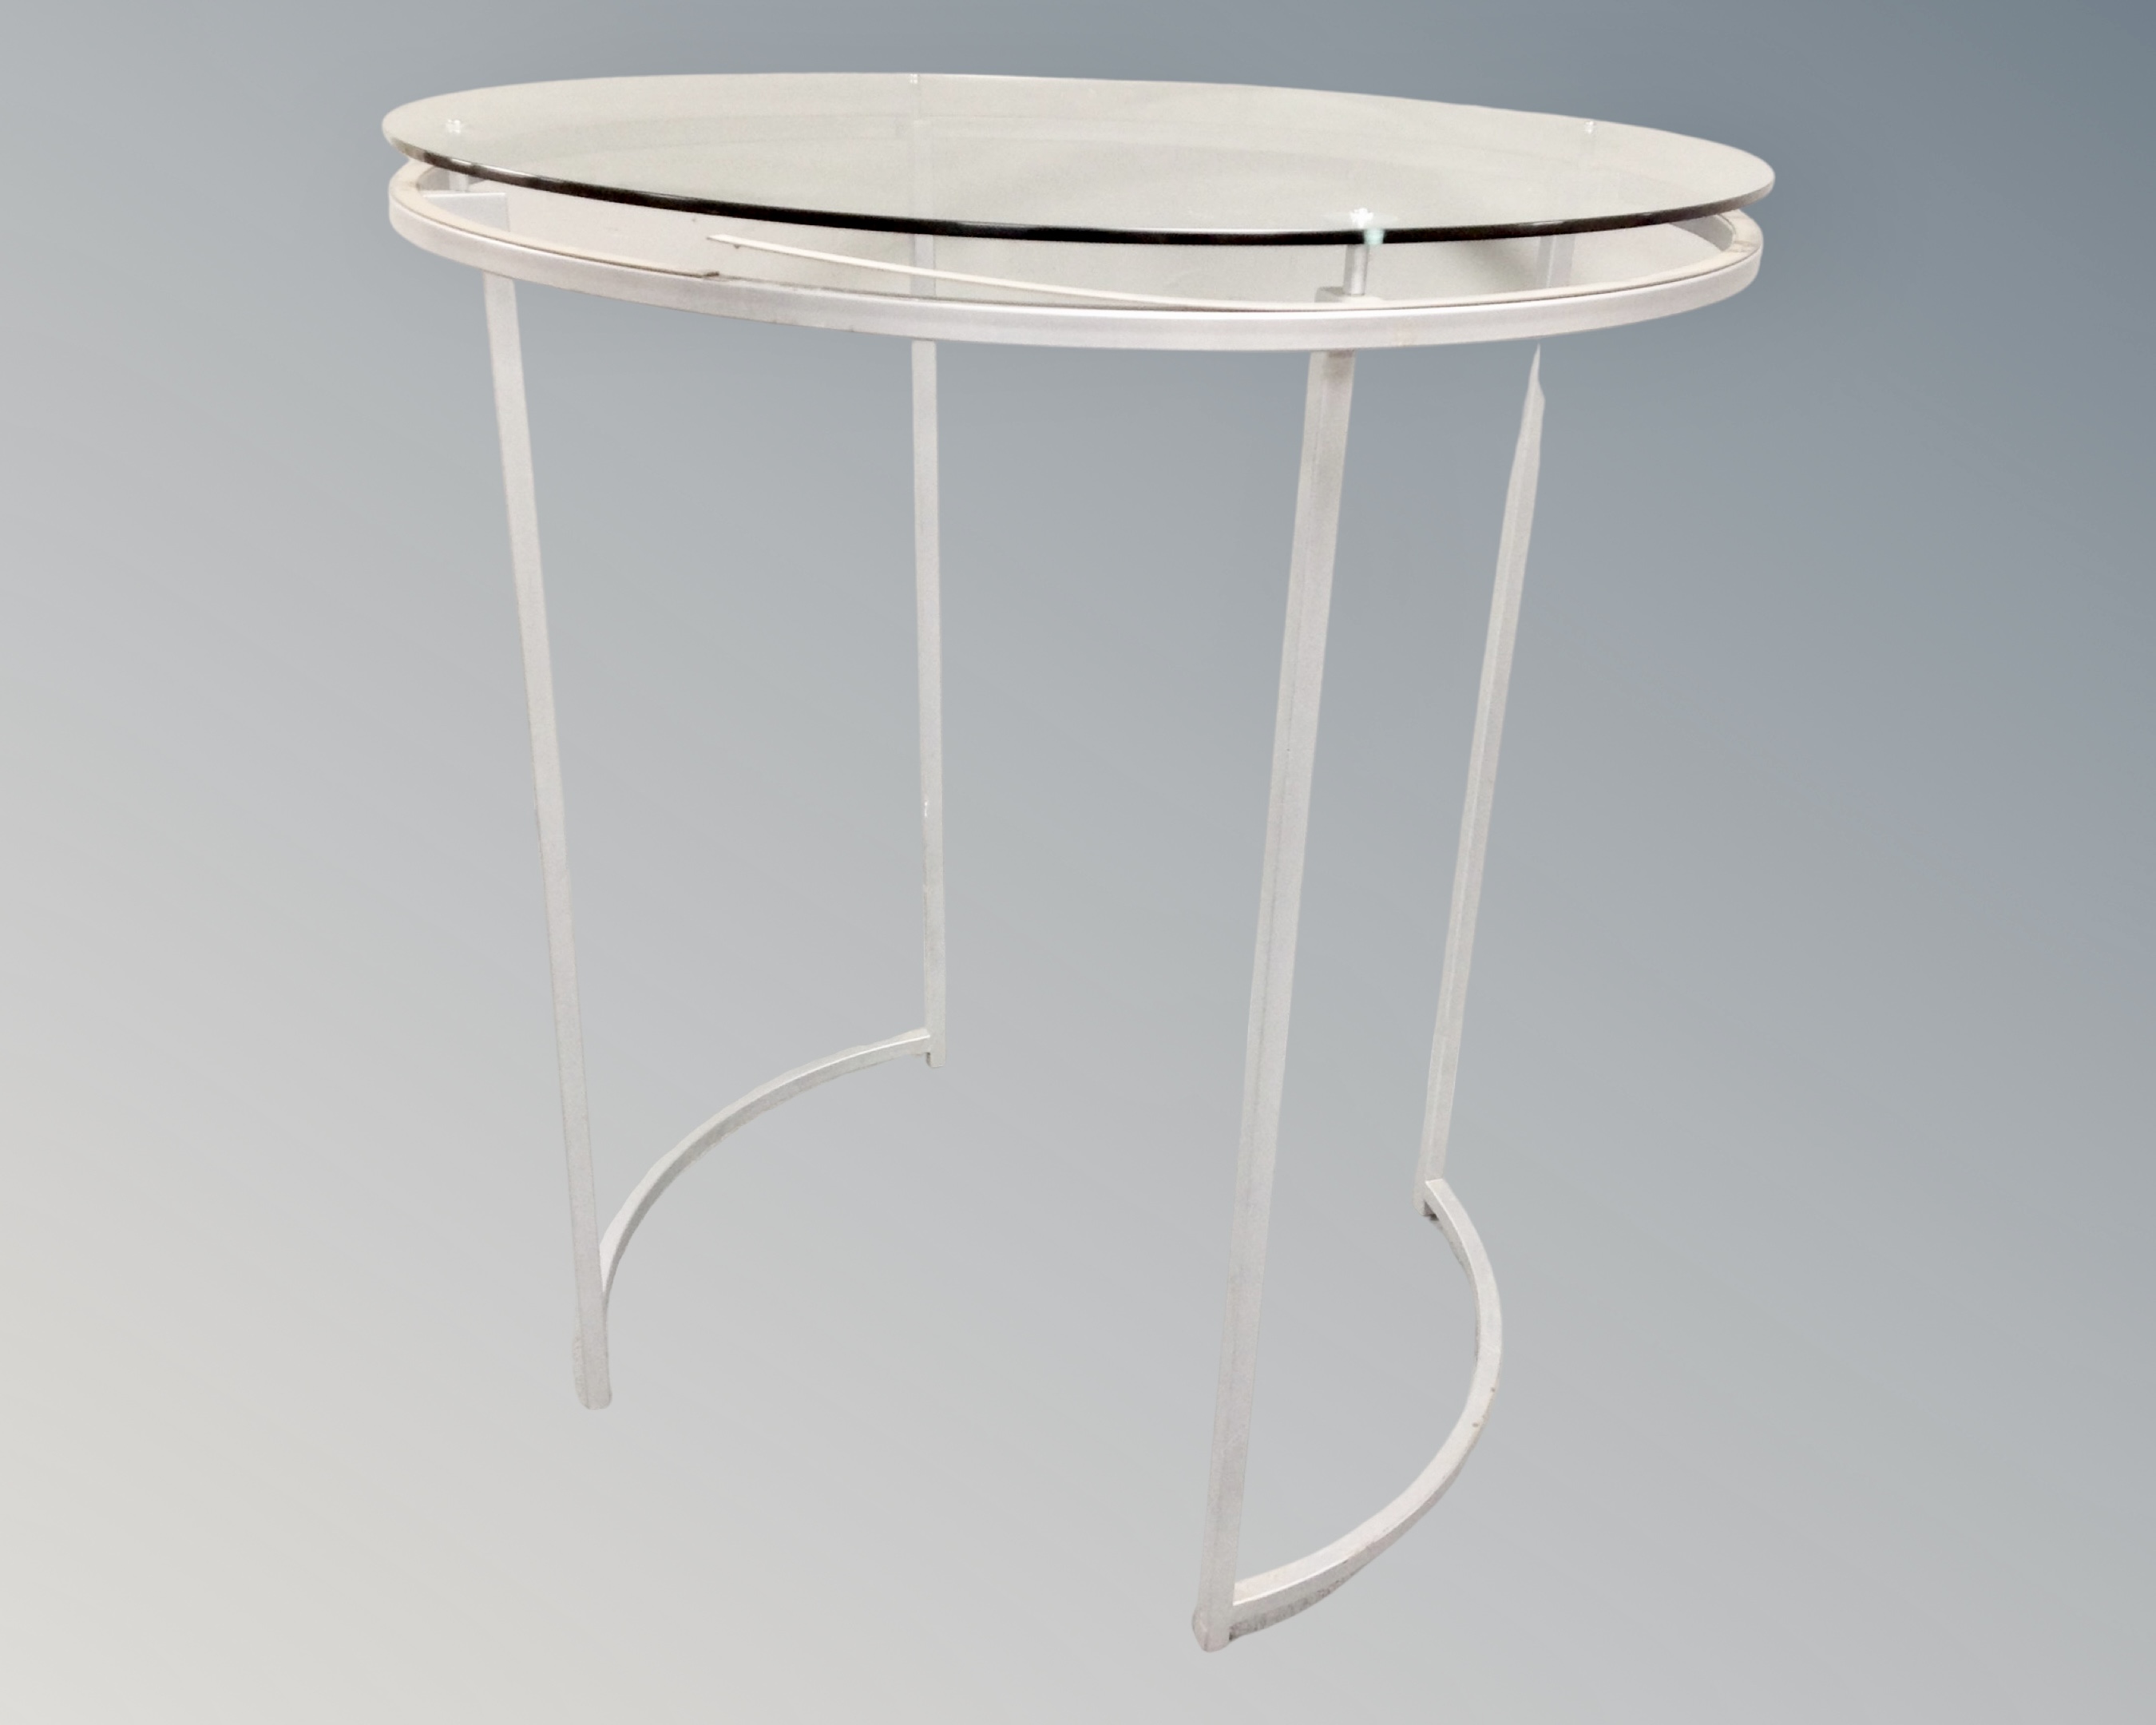 A pair of circular metal glass topped shop display stands / clothes racks with hangers